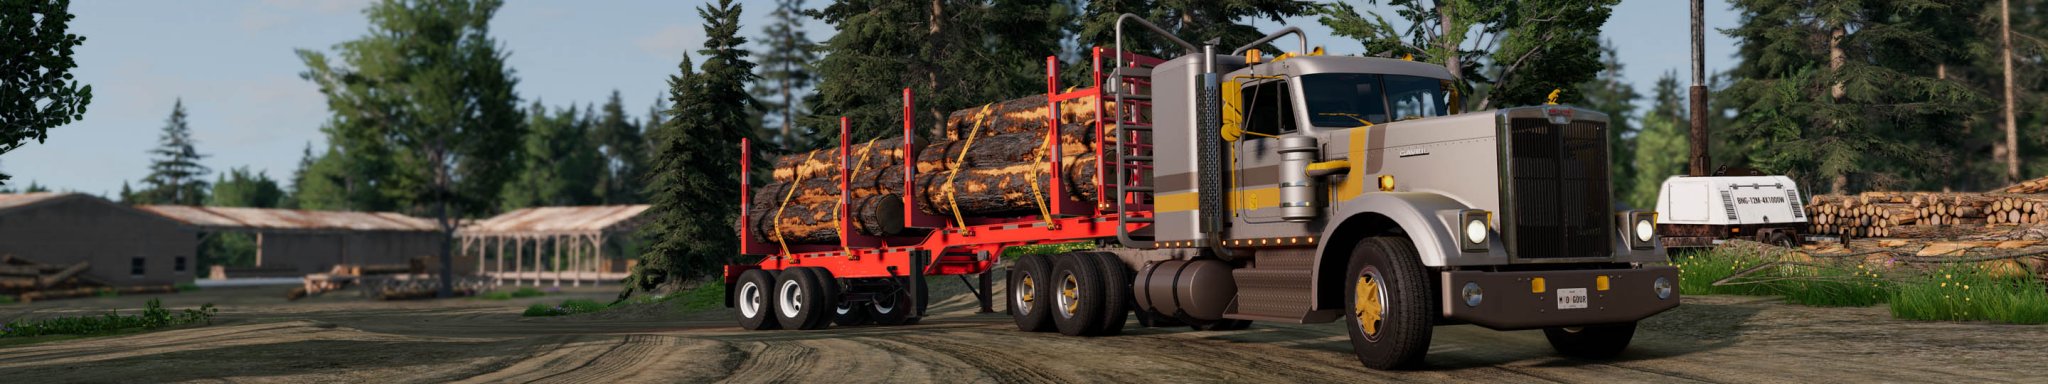 2 BeamNG 032 CONCRTE MIXERS and LOGGING TRAILER copy.jpg